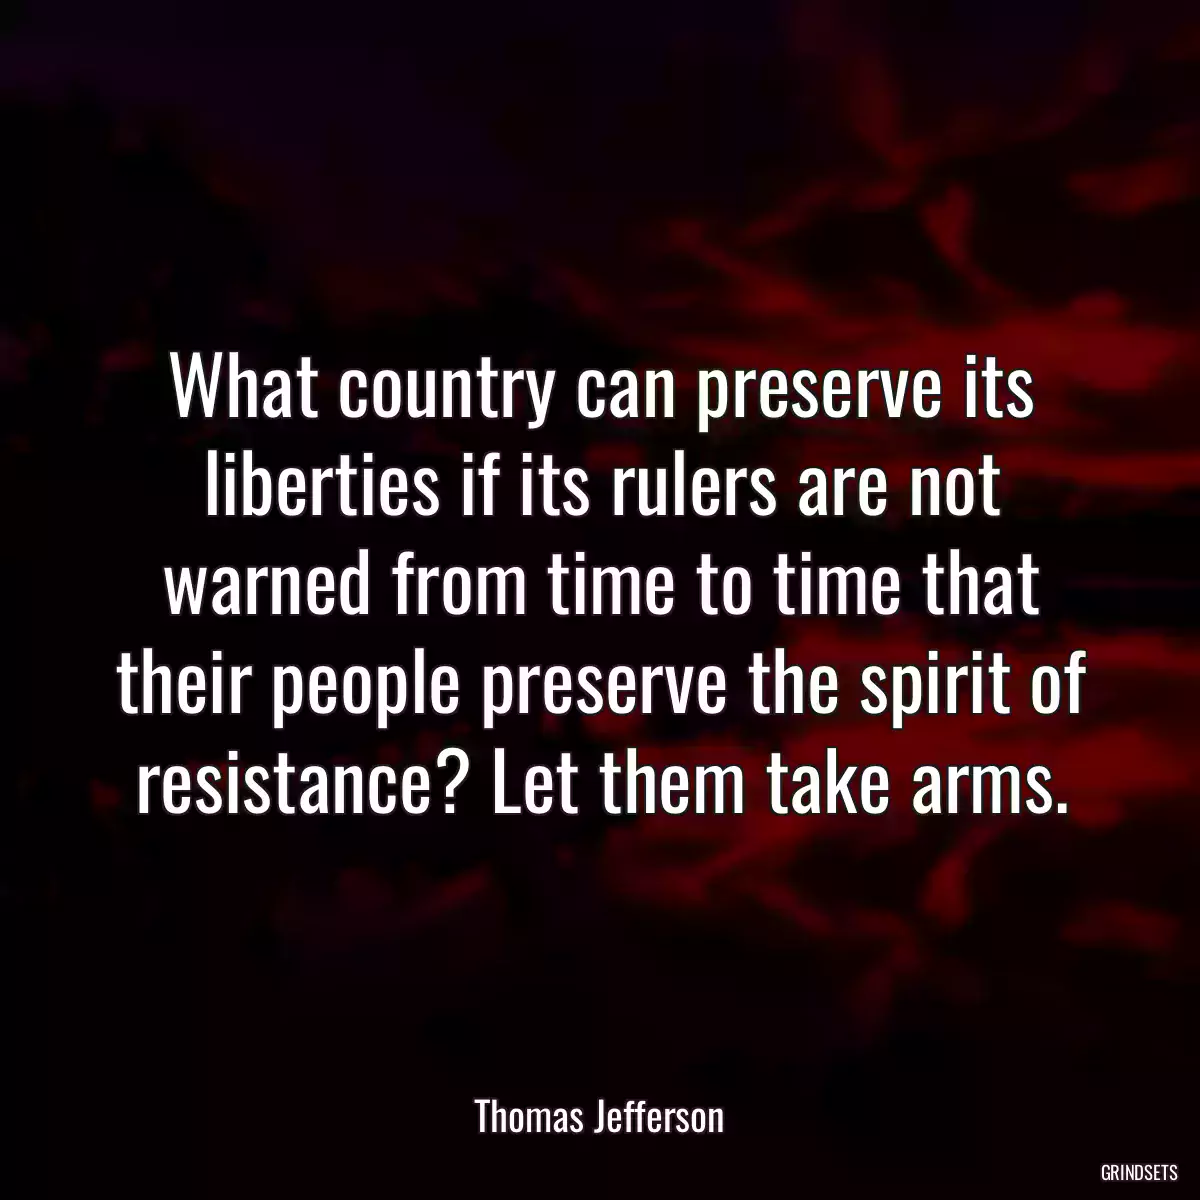 What country can preserve its liberties if its rulers are not warned from time to time that their people preserve the spirit of resistance? Let them take arms.